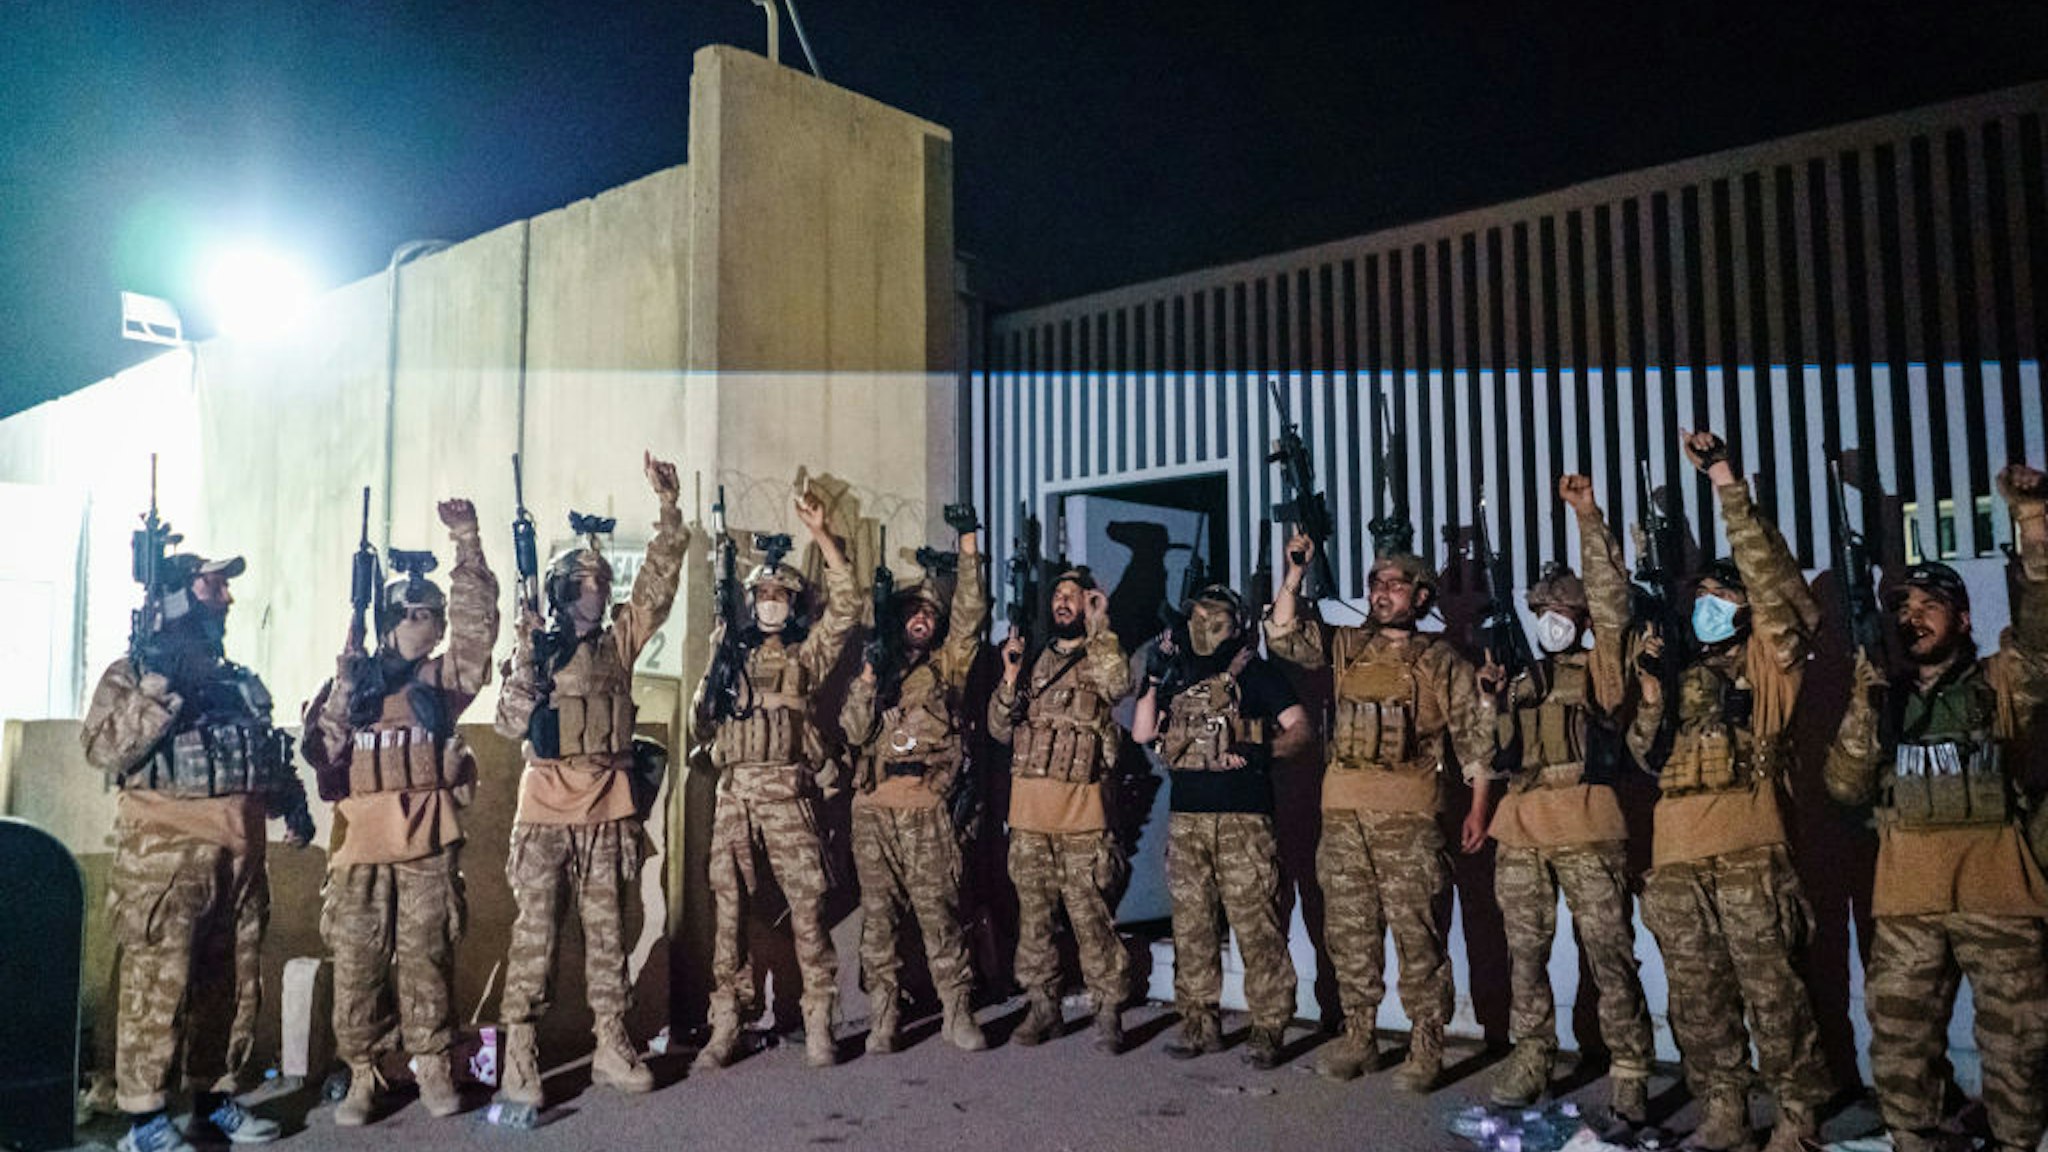 Taliban fighters from the Fateh Zwak unit celebrate before storming into the Kabul International Airport, wielding American supplied weapons, equipment and uniforms after the United States Military have completed their withdrawal, in Kabul, Afghanistan, Tuesday, Aug. 31, 2021.